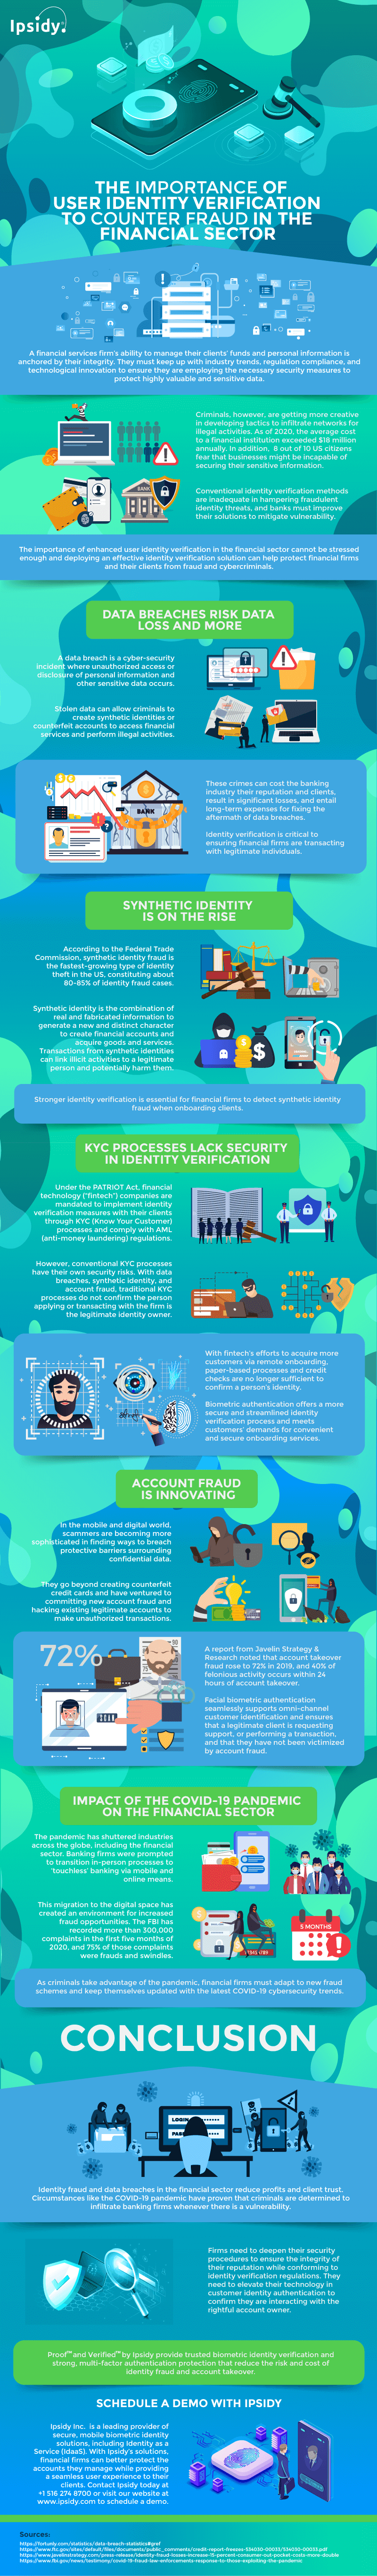 The Importance of Trusted User Identity Verification to Counter Fraud in the Financial Sector Infographic ipsidy